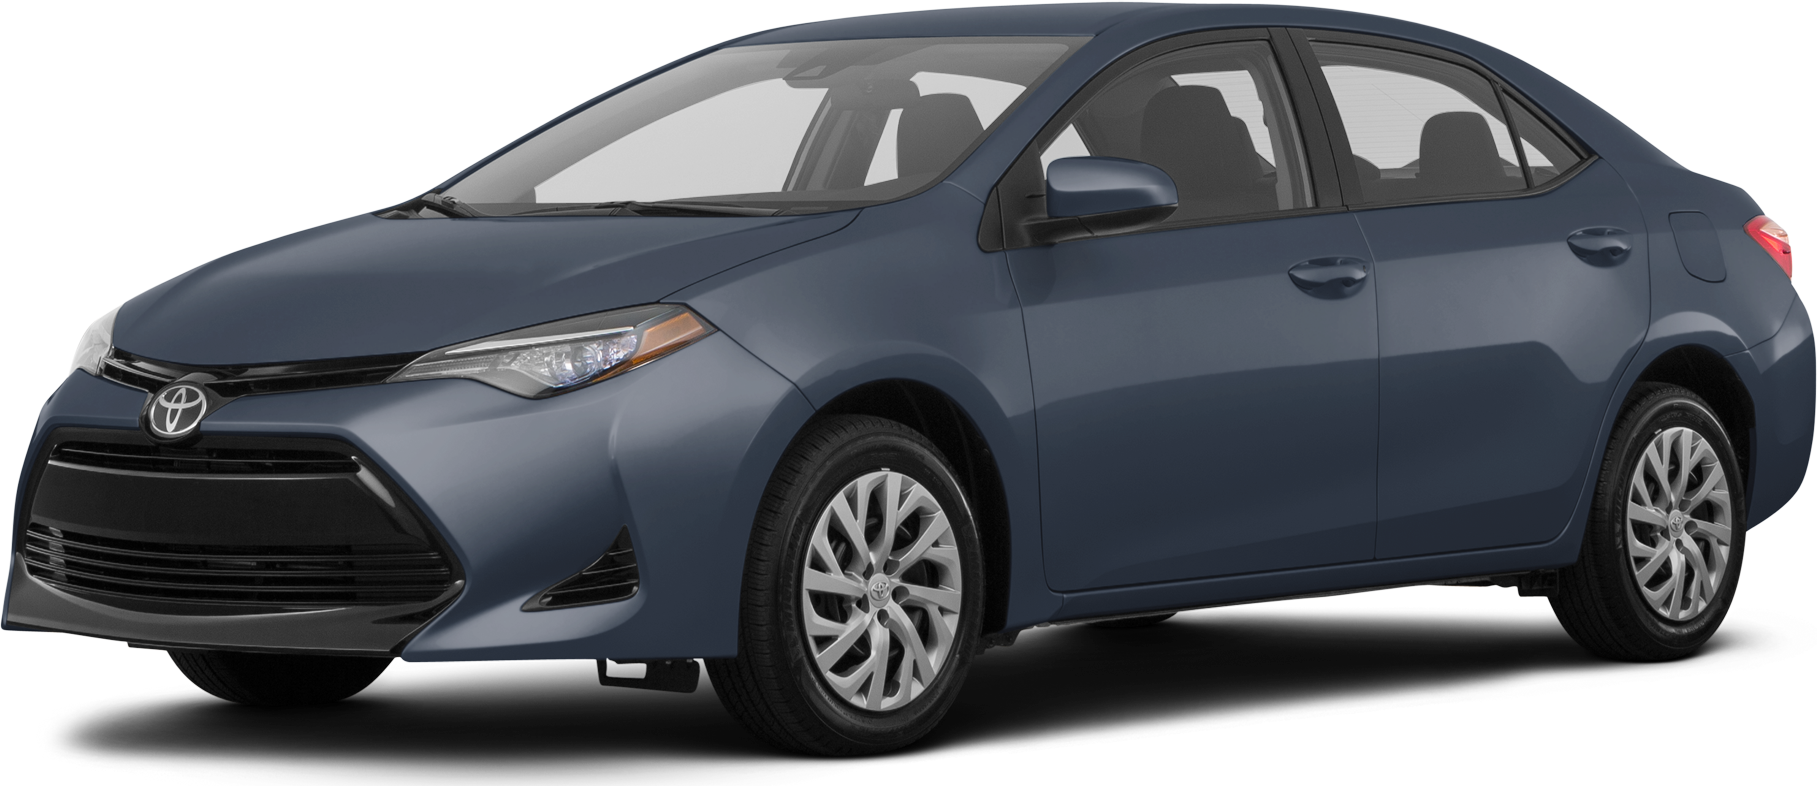 Christchurch clarity reputation 2019 Toyota Corolla Values & Cars for Sale | Kelley Blue Book